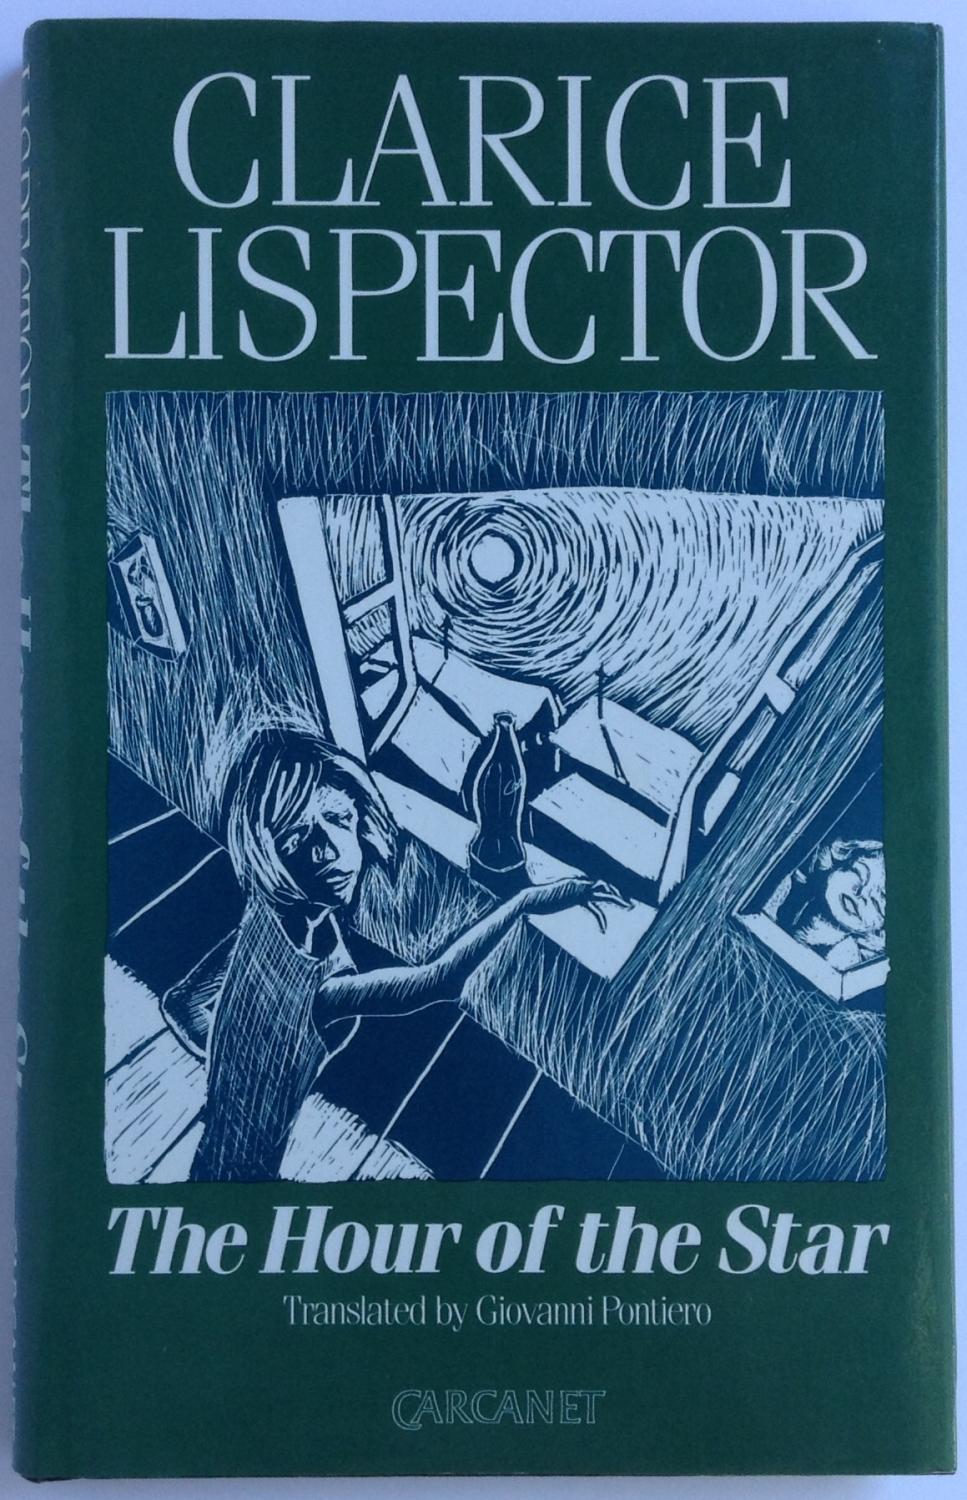 Week 8: Clarice Lispector’s “The Hour of the Star”